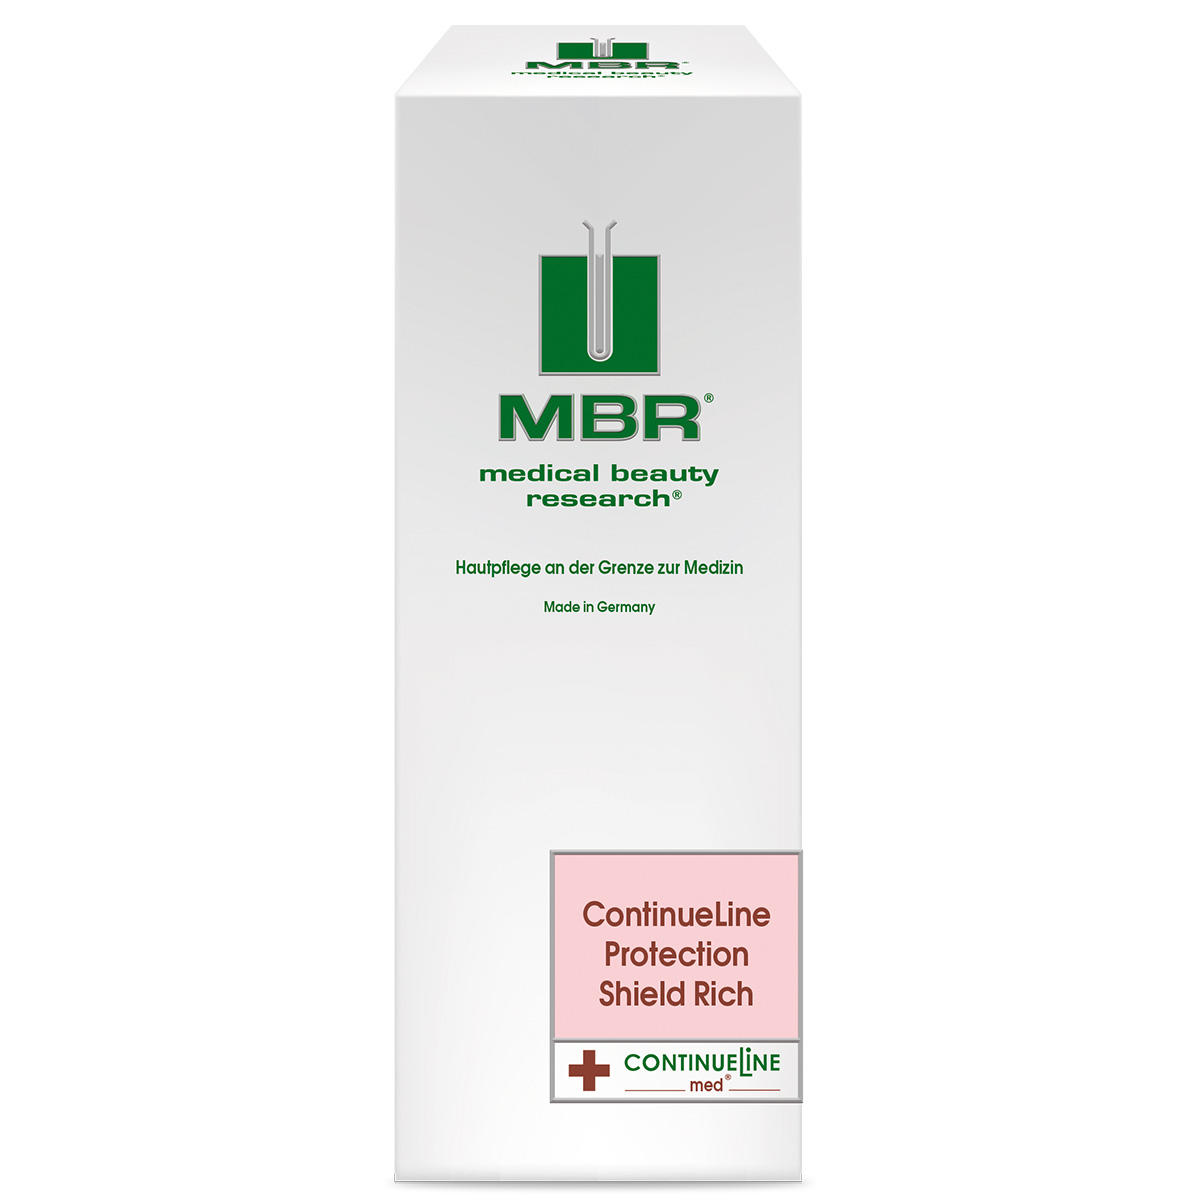 MBR Medical Beauty Research ContinueLine med Protection Shield Rich 50 ml - 2